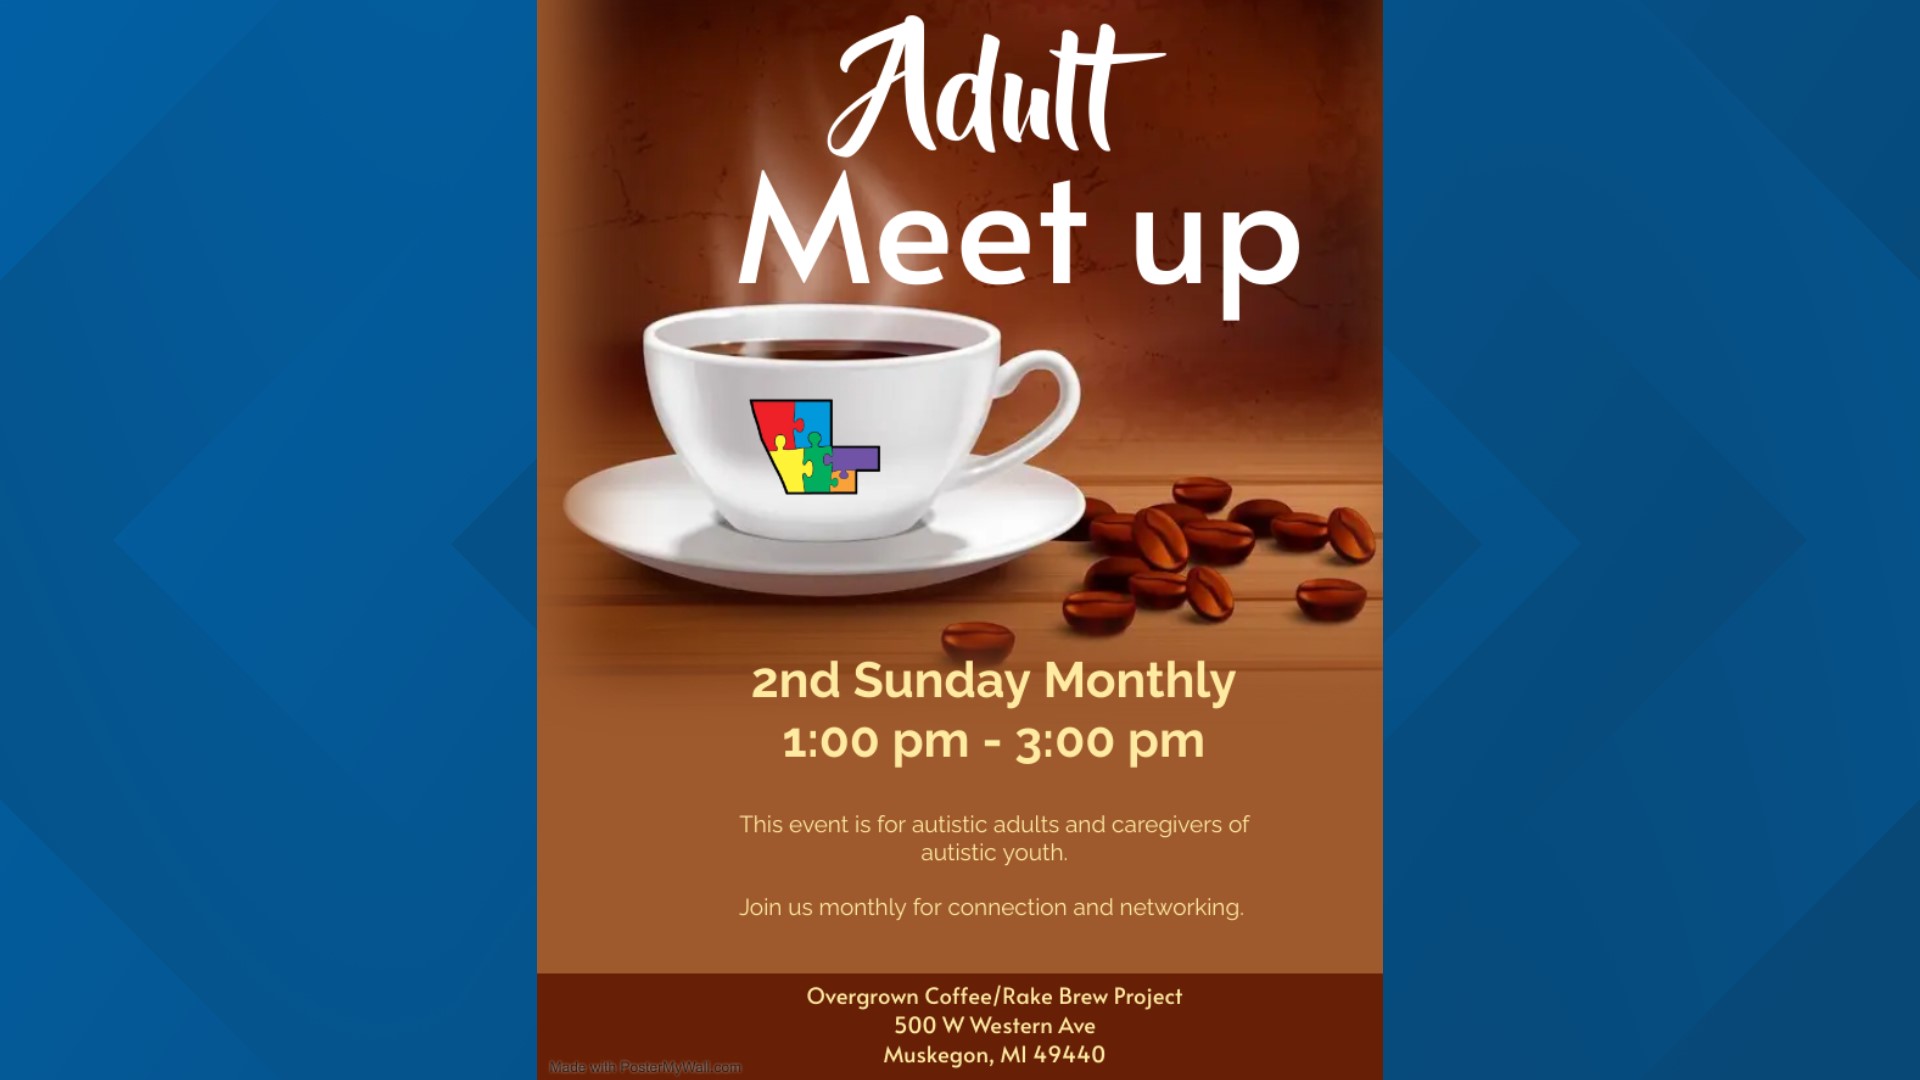 The non-profit hosts monthly family gatherings and adult meet-ups for people on the autism spectrum and their caregivers.